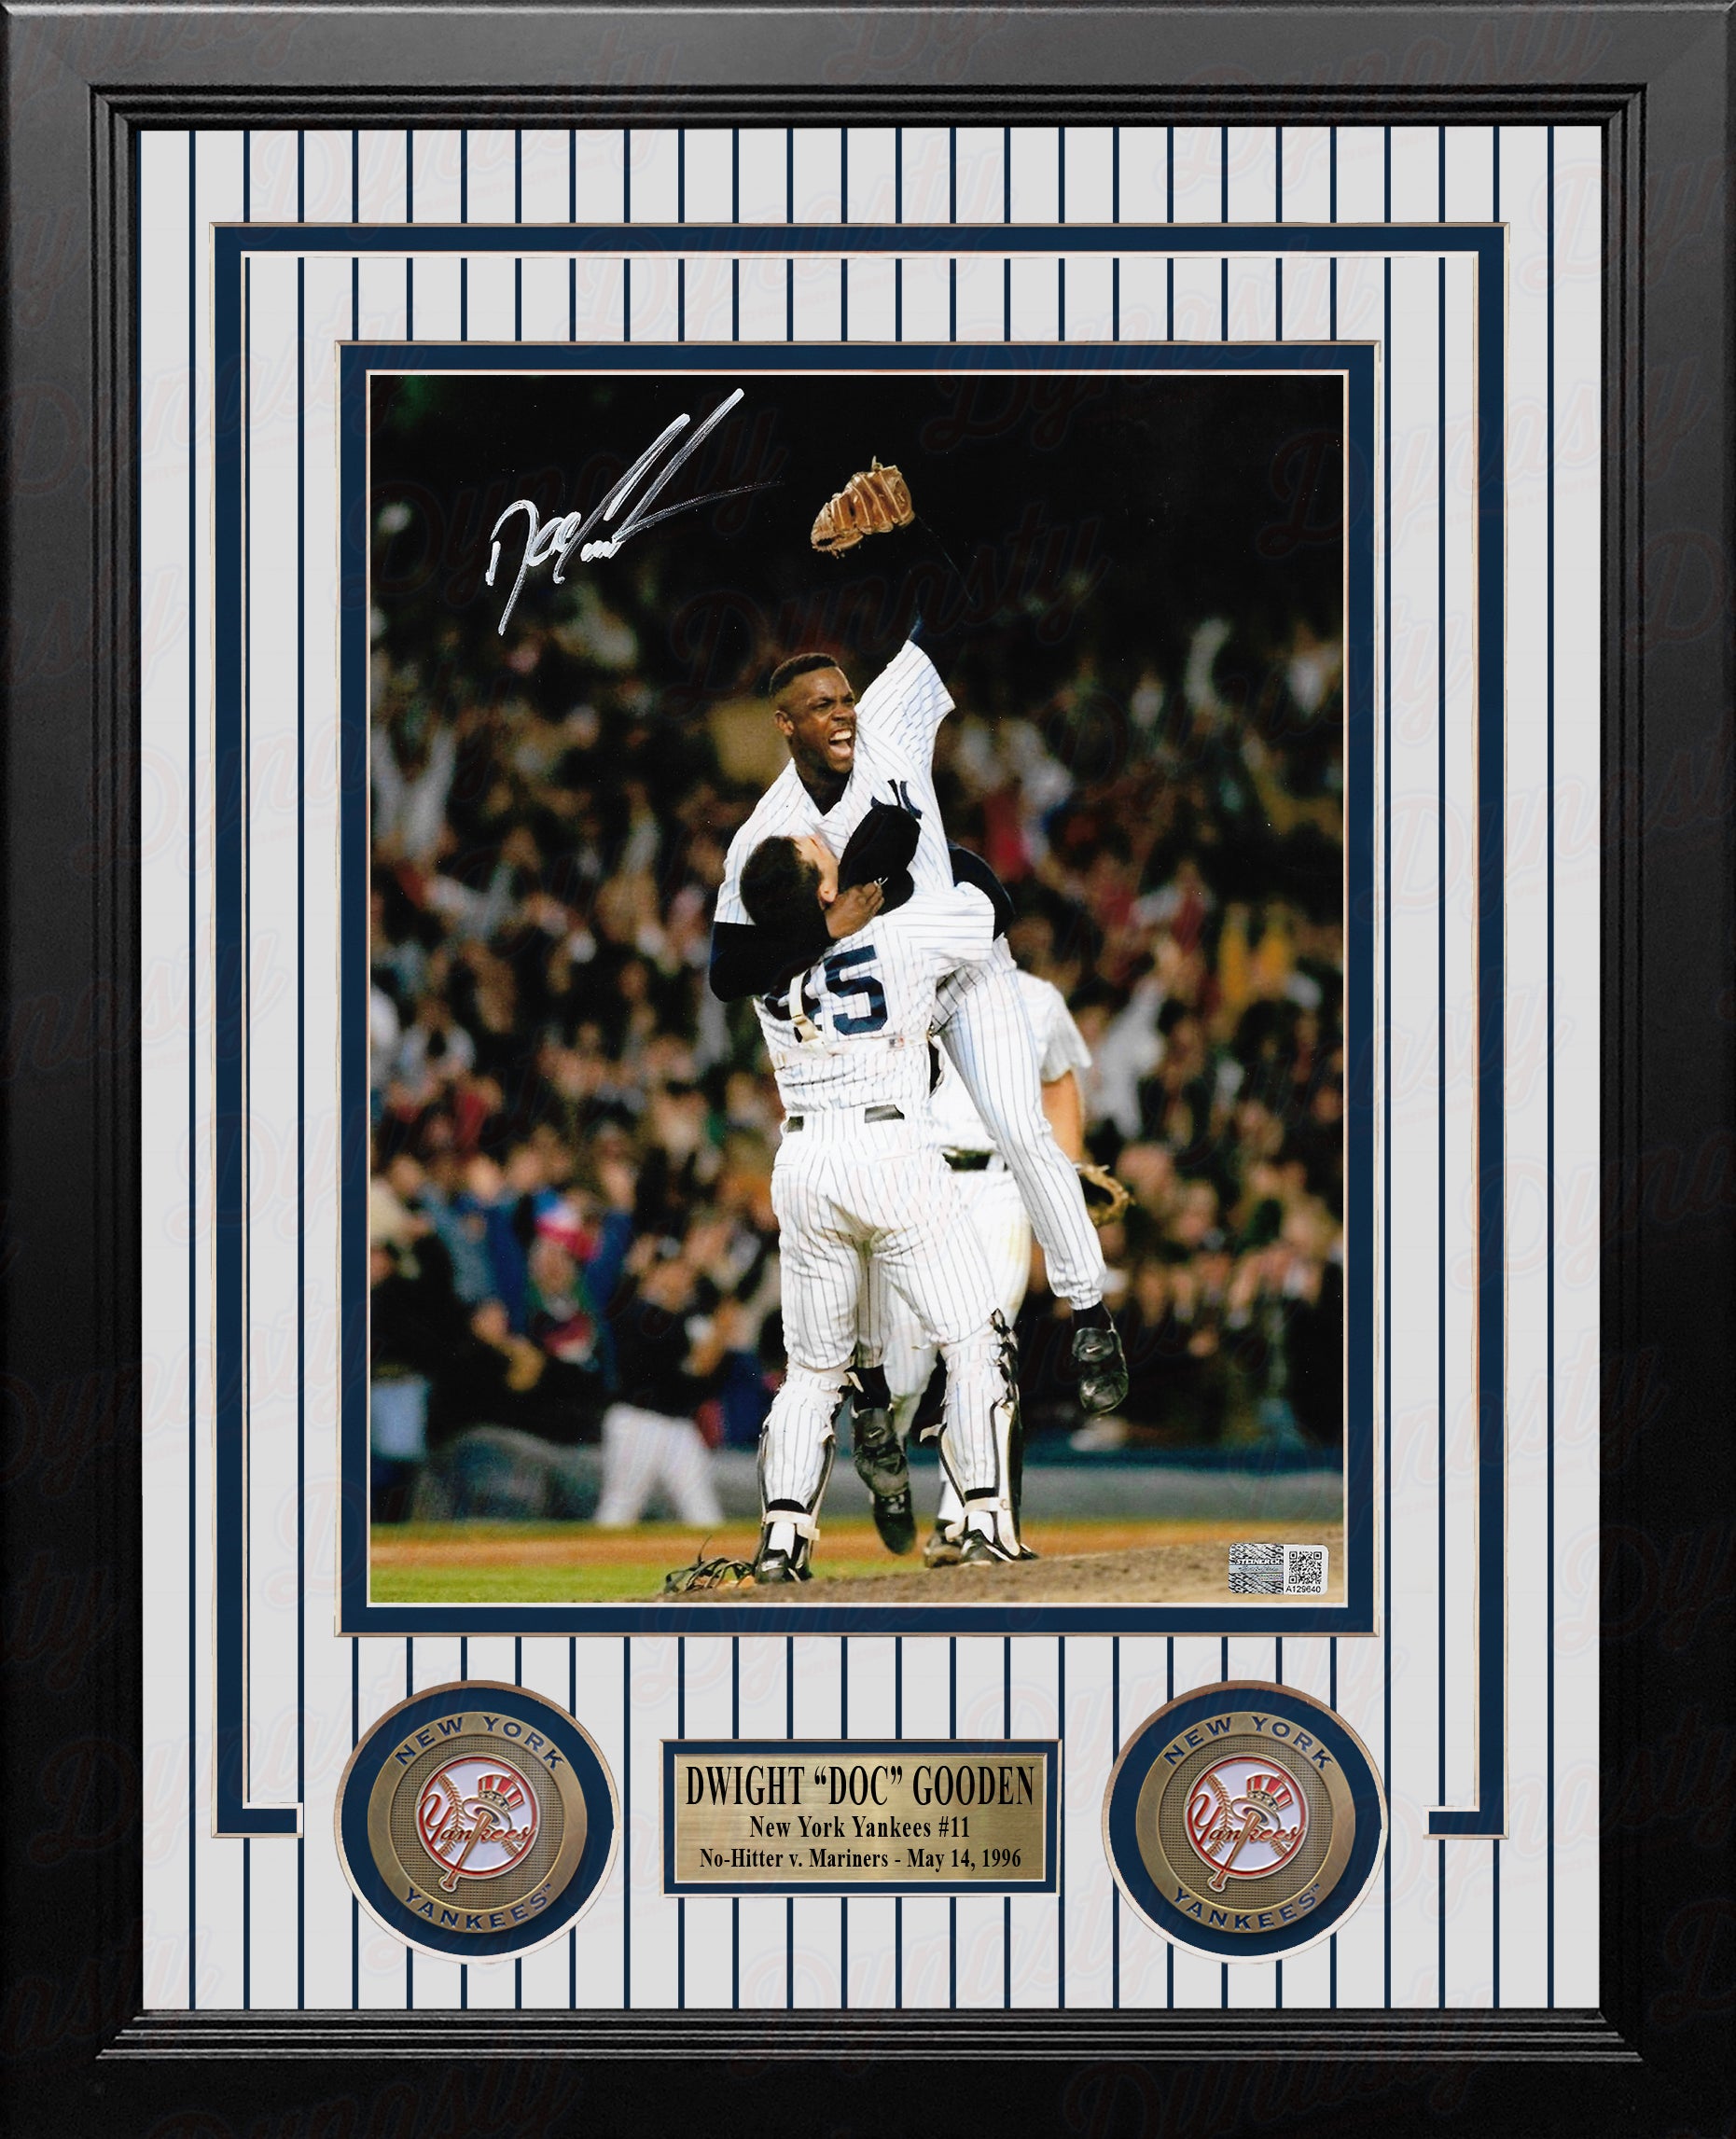 Dwight "Doc" Gooden No-Hitter New York Yankees Autographed 8" x 10" Framed Baseball Photo - Dynasty Sports & Framing 